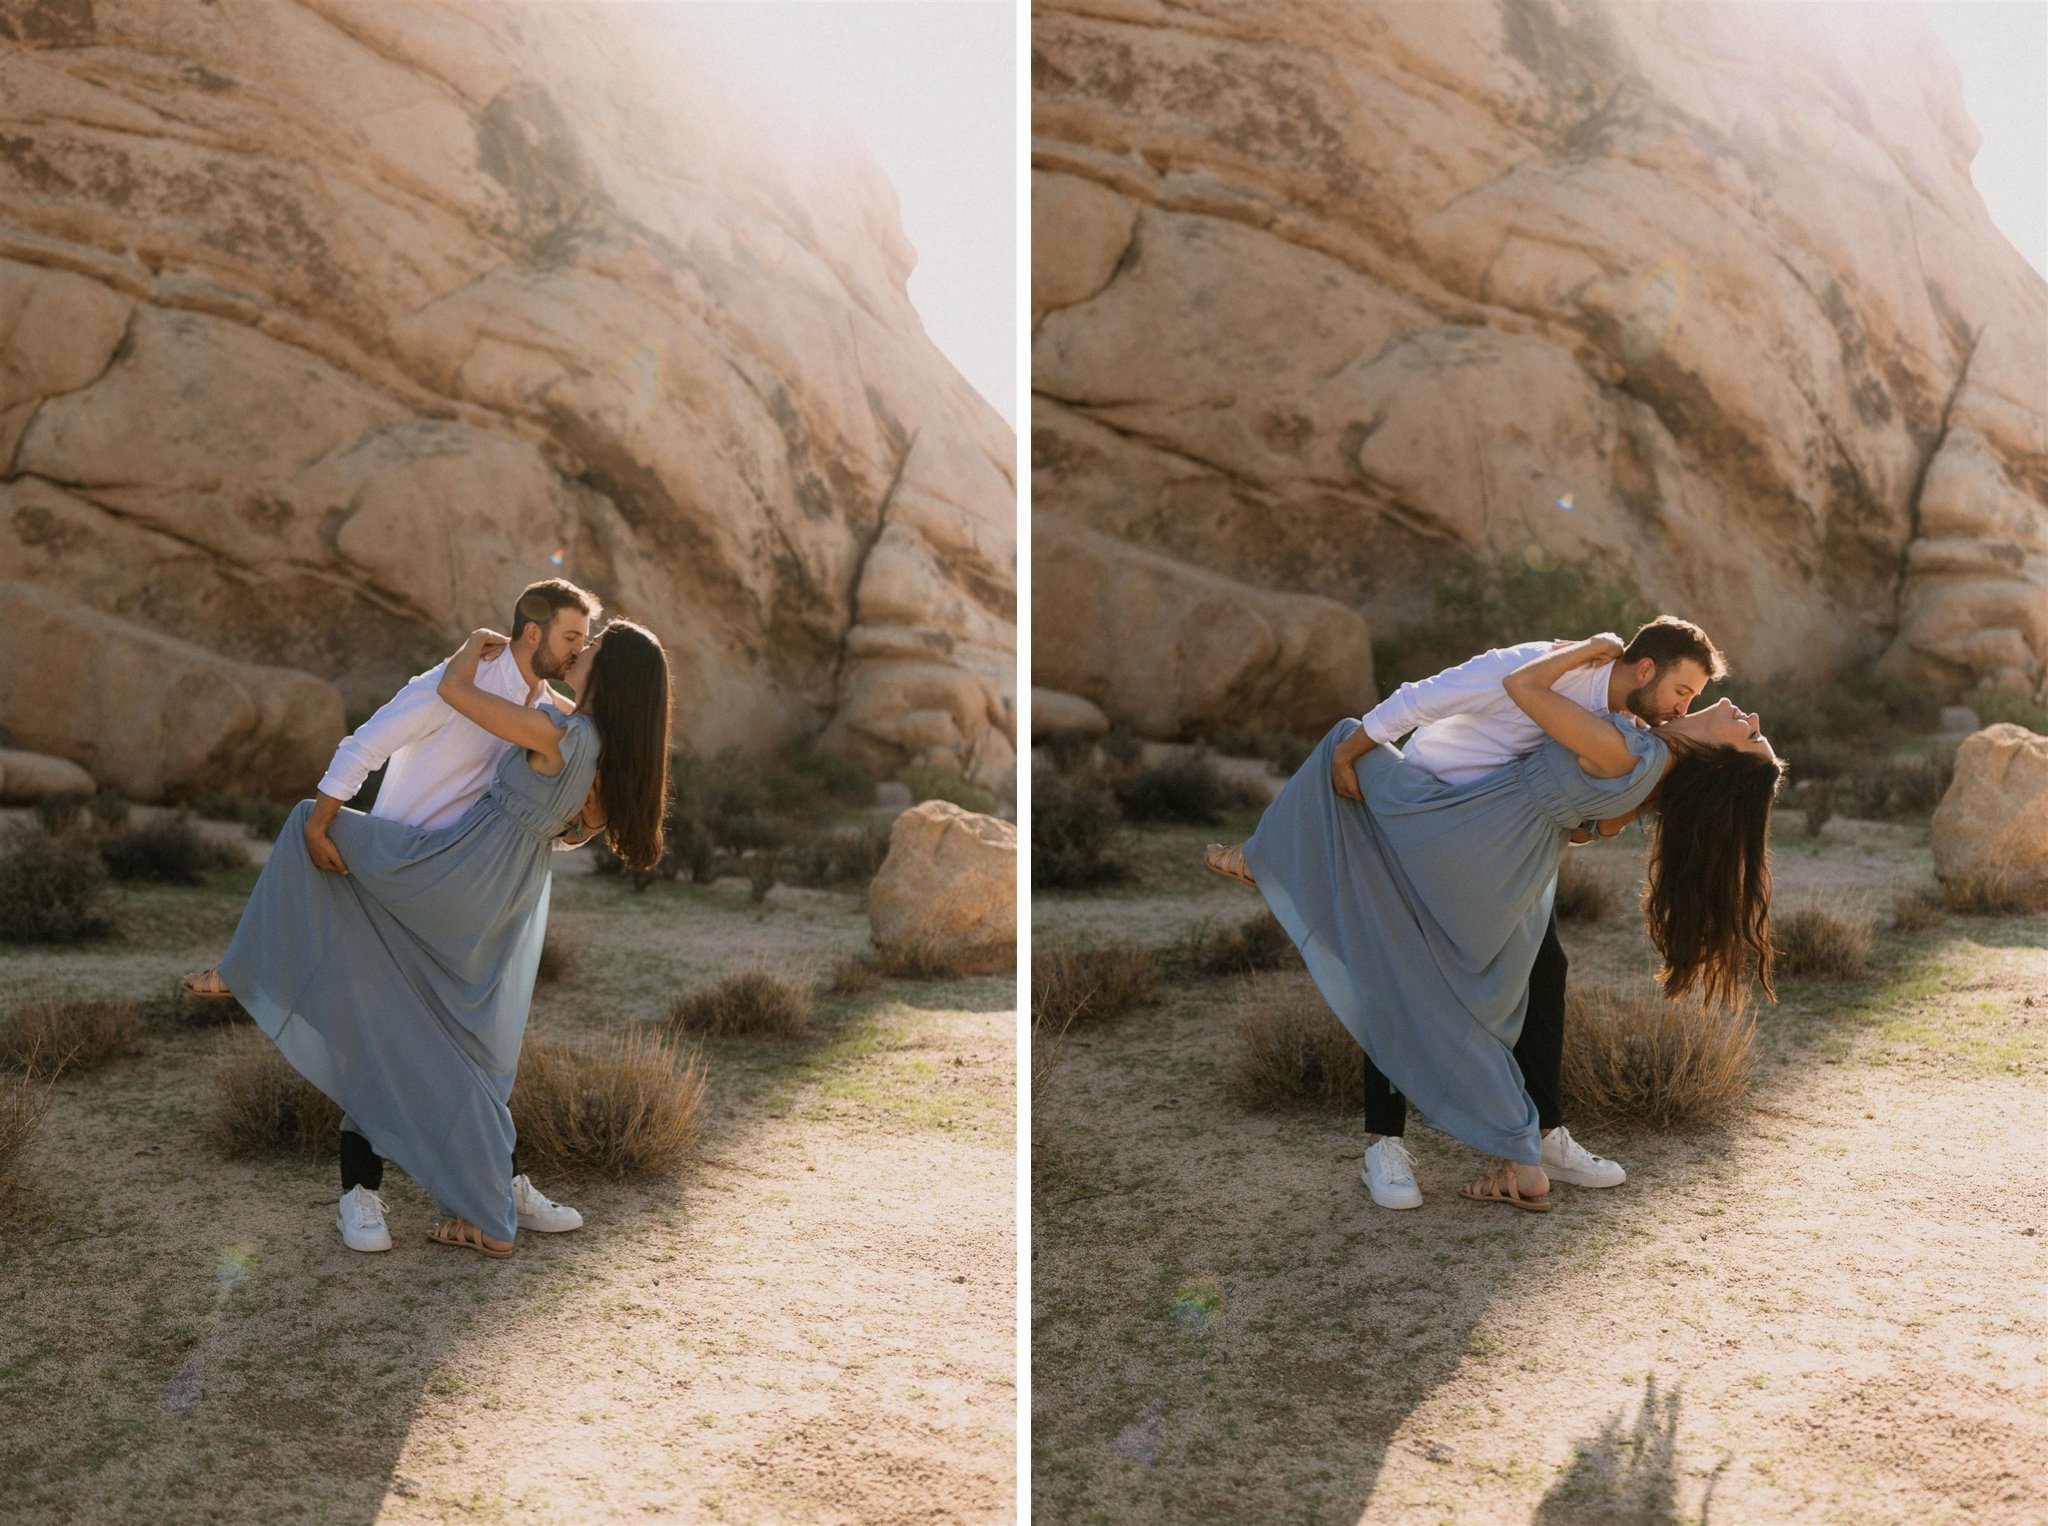 Joshua Tree Couples Session Surprise Proposal - Will Khoury Photography_28.jpg